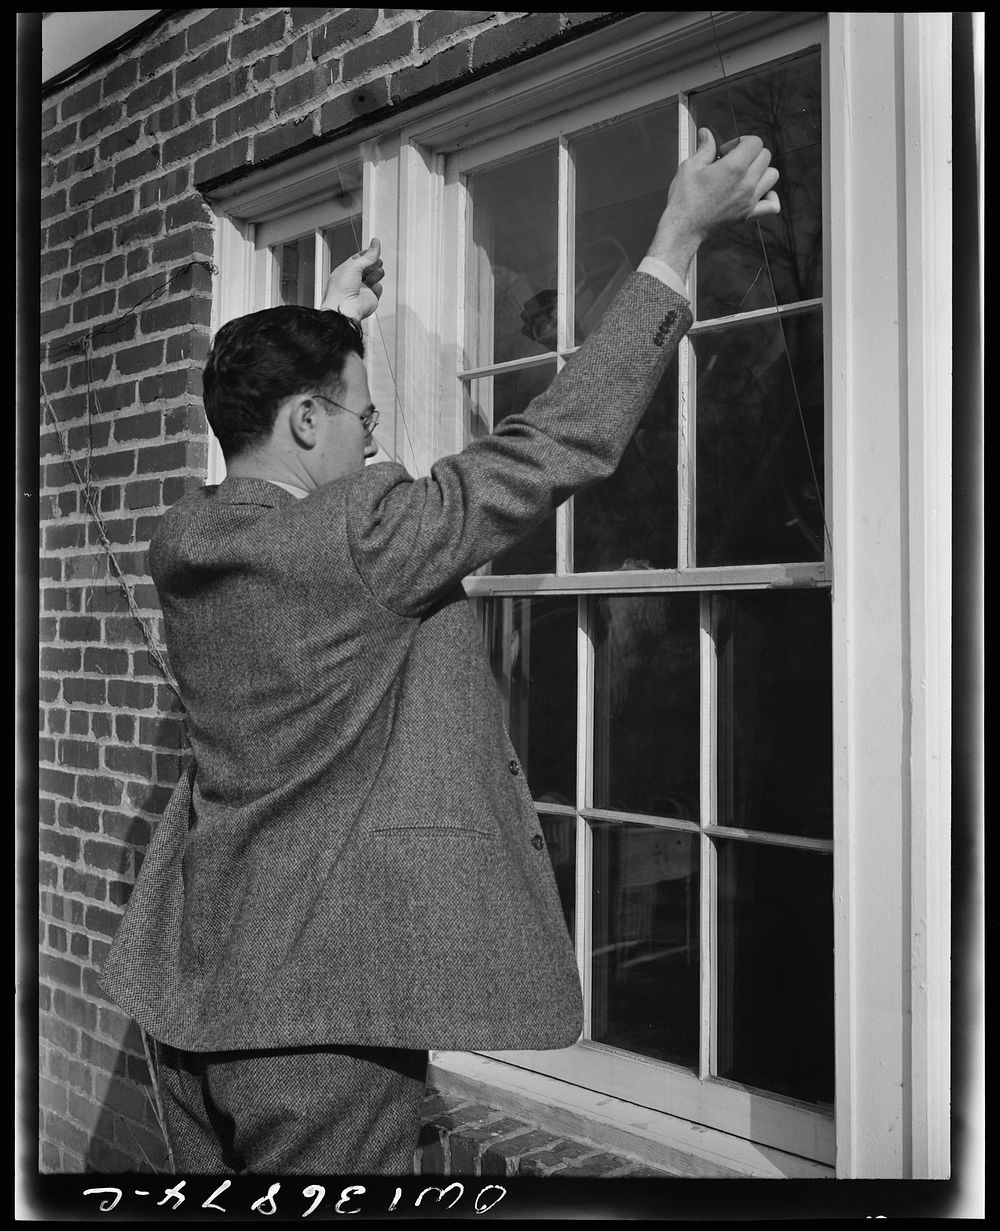 Washington, D.C. Installing a "Victory" storm pane, or extra pane of glass on a home window as a war-time fuel conservation…